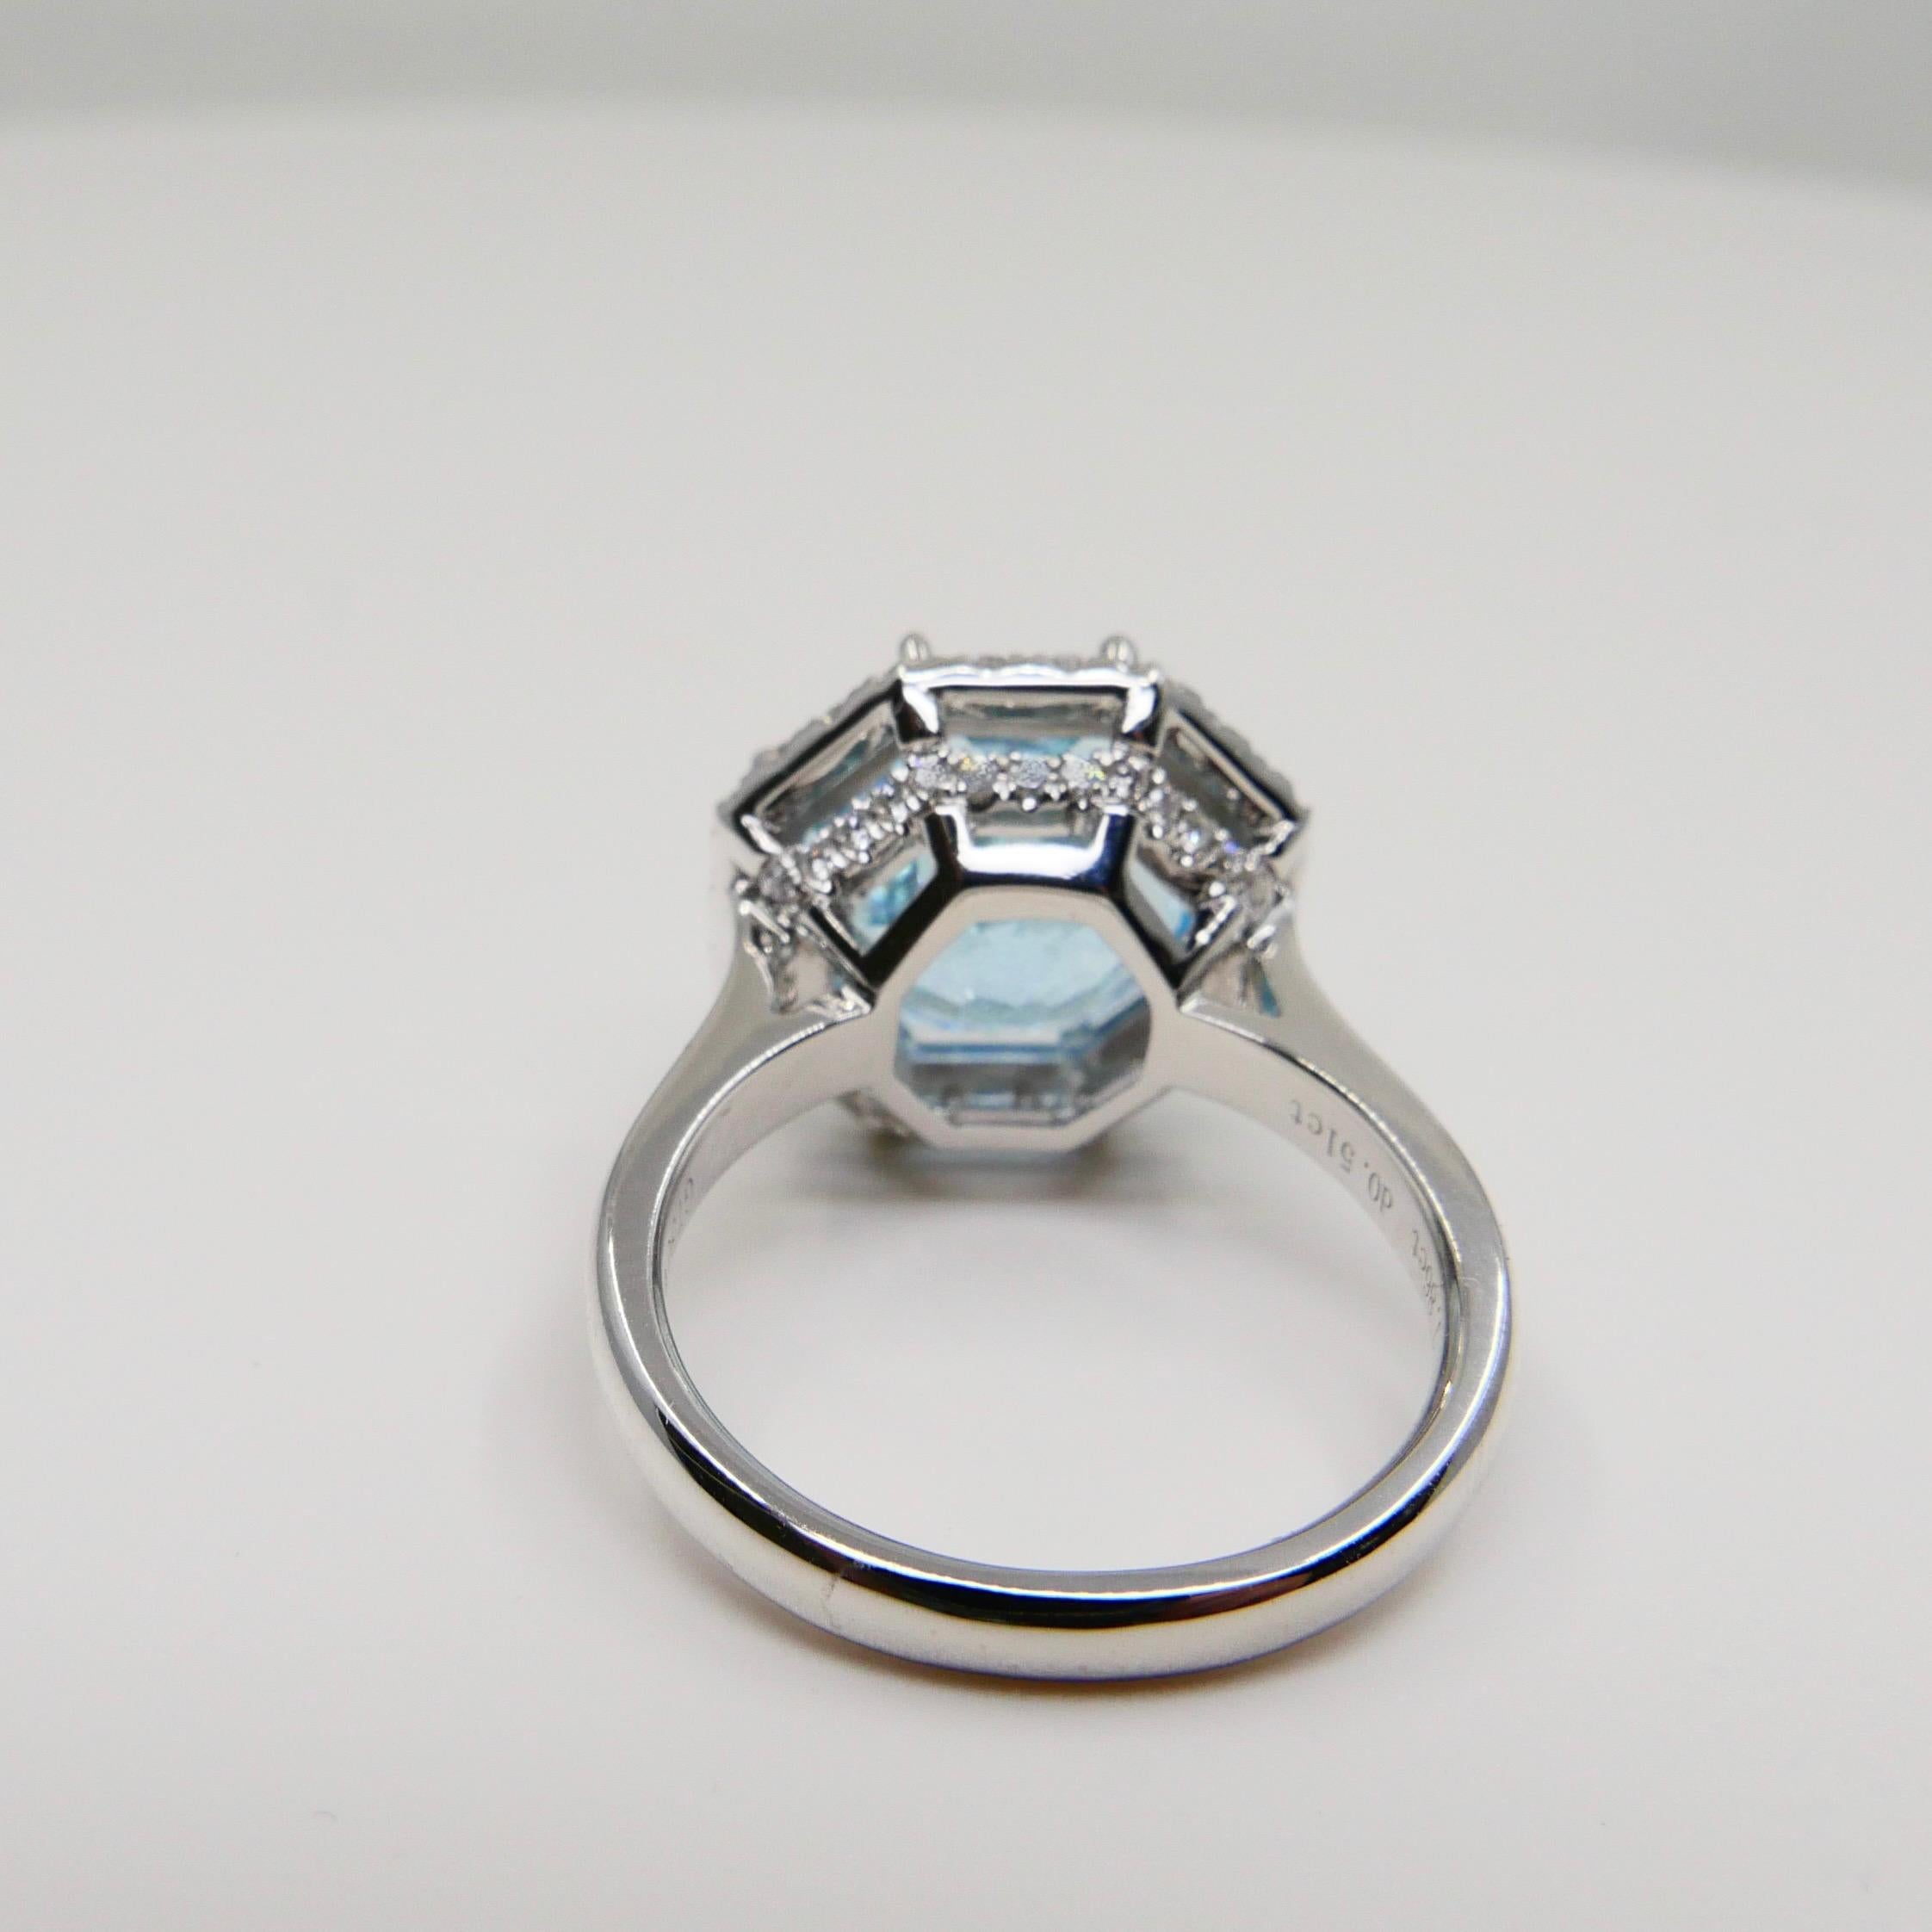 Flower Cut Powder Blue Topaz 7.86 Cts and Diamond Cocktail Ring, Statement Ring For Sale 2